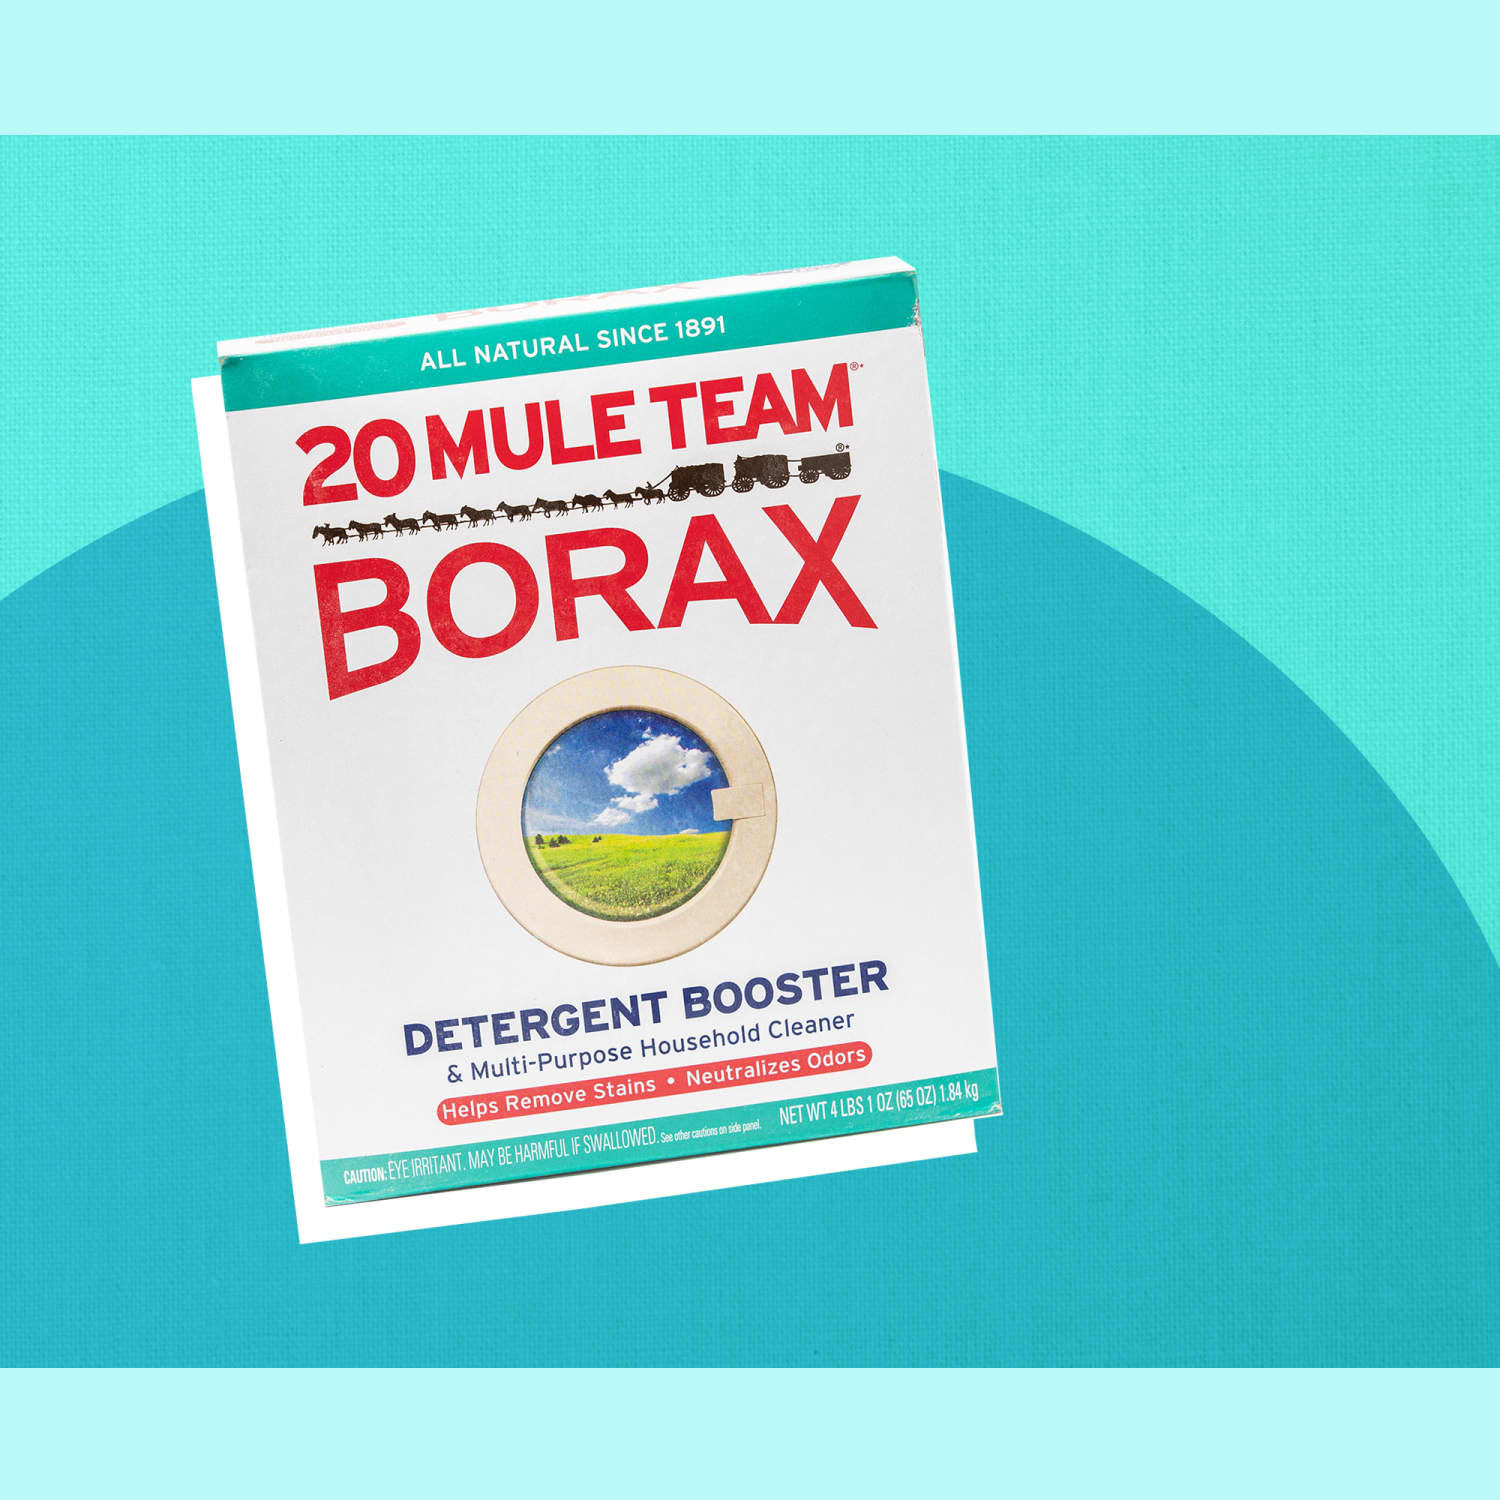 The many ways you can use borax in your home